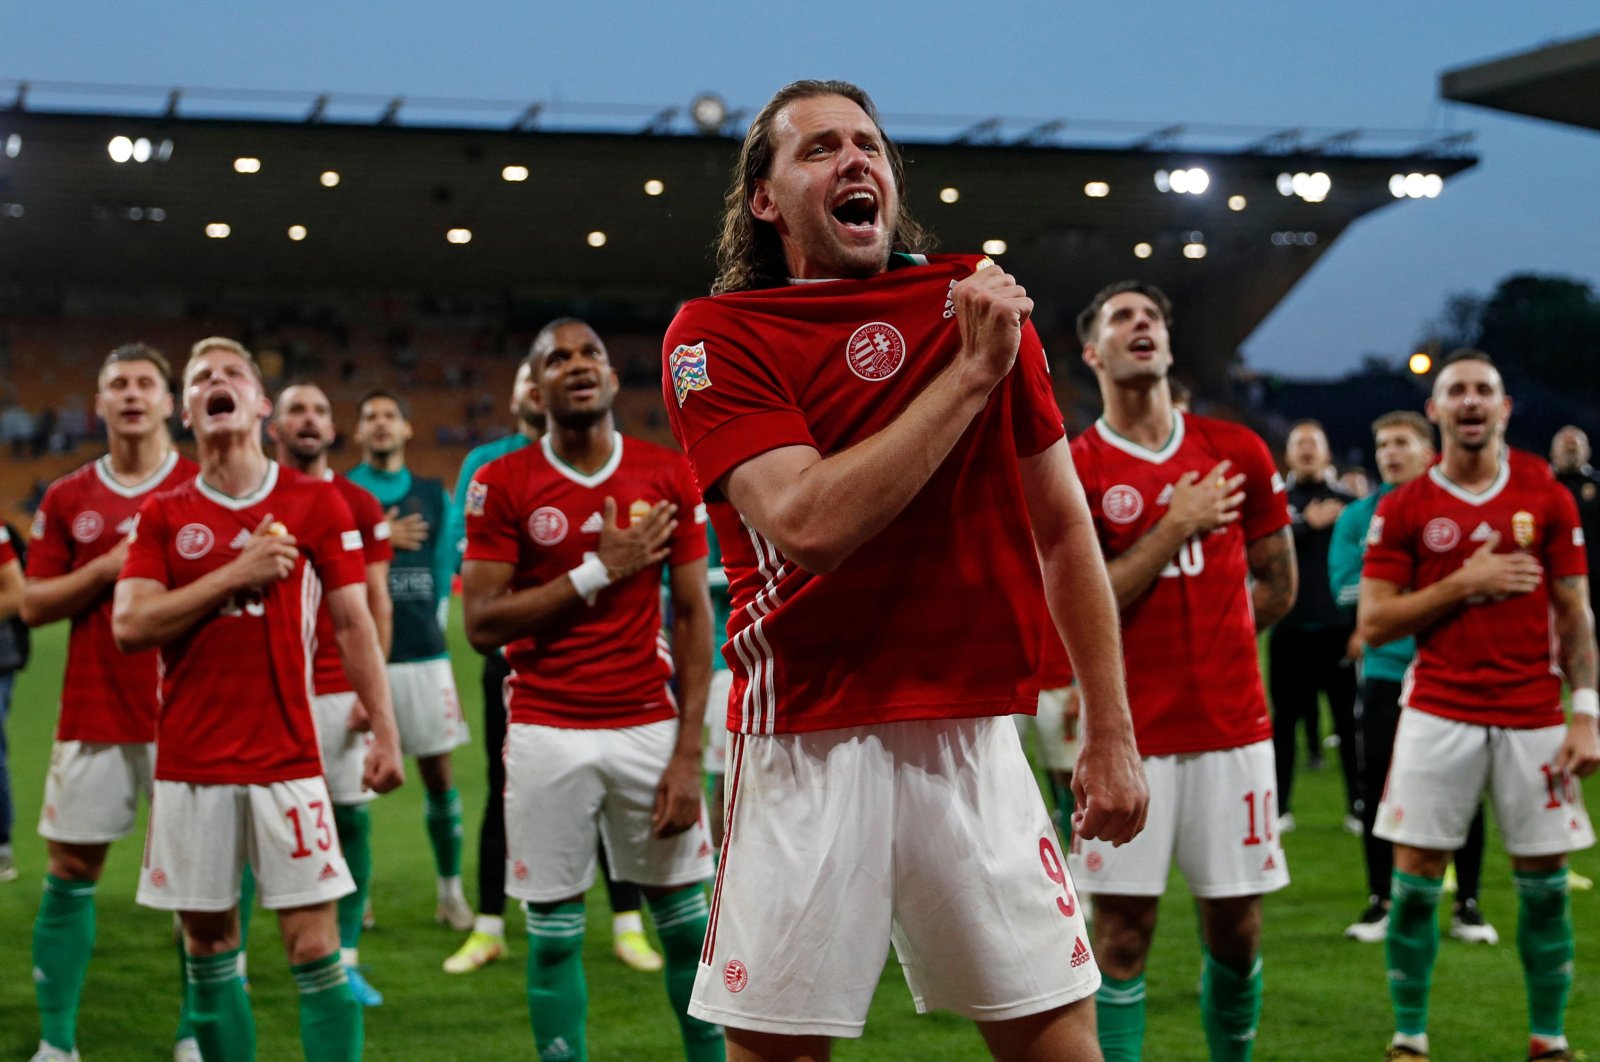 Hungary players celebrate a win over England in the UEFA Nations League, Wolverhampton, England, June 14, 2022. (AFP Photo)